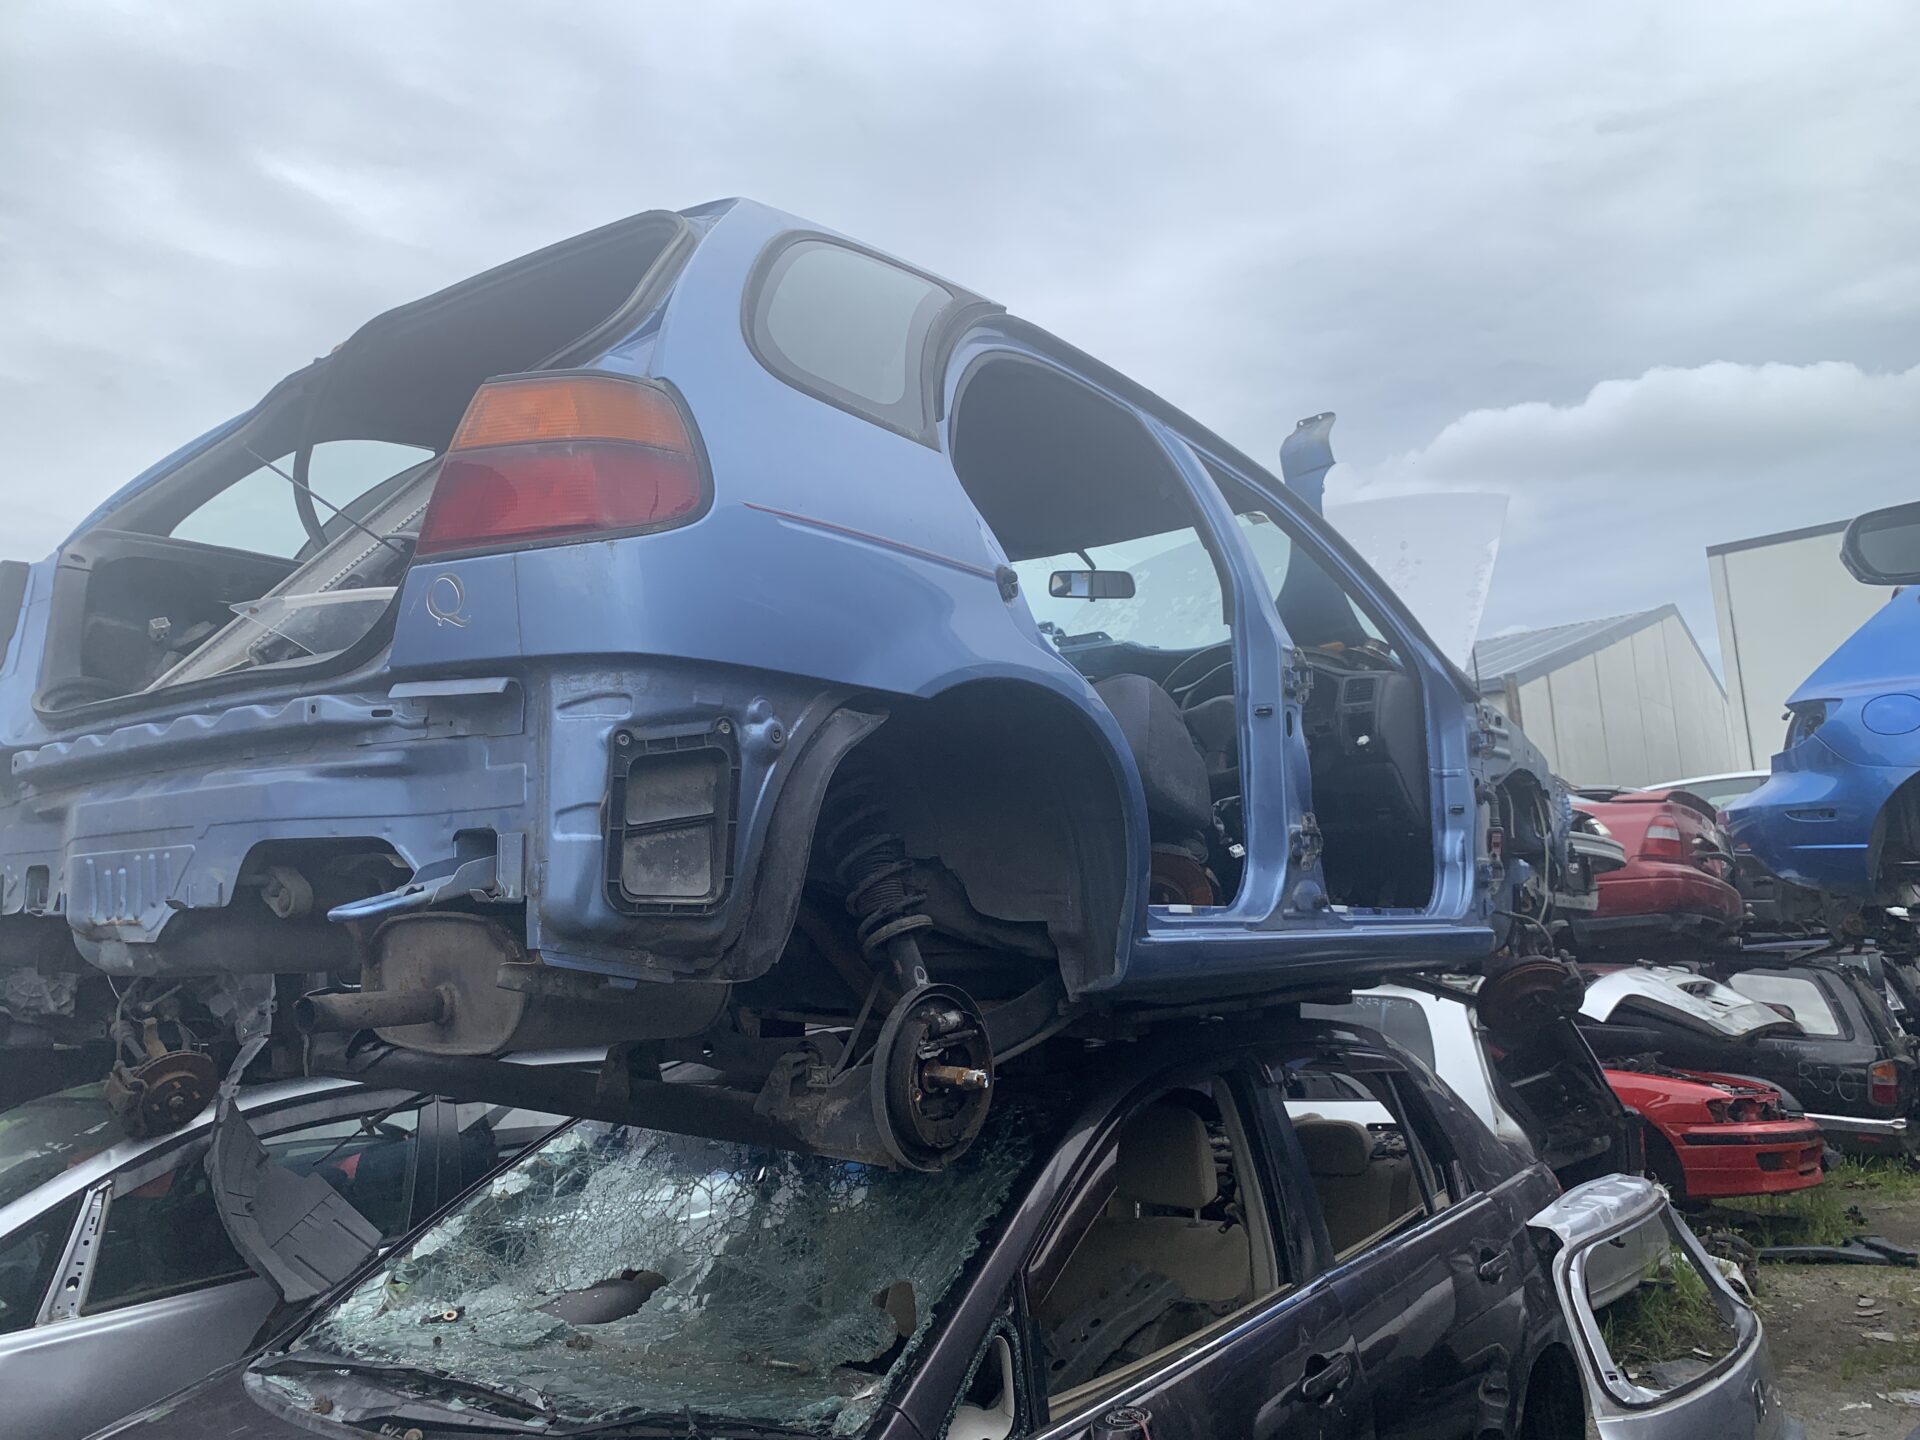 Car Wreckers Katoomba NSW: Wrecked Car Buyers & Parts